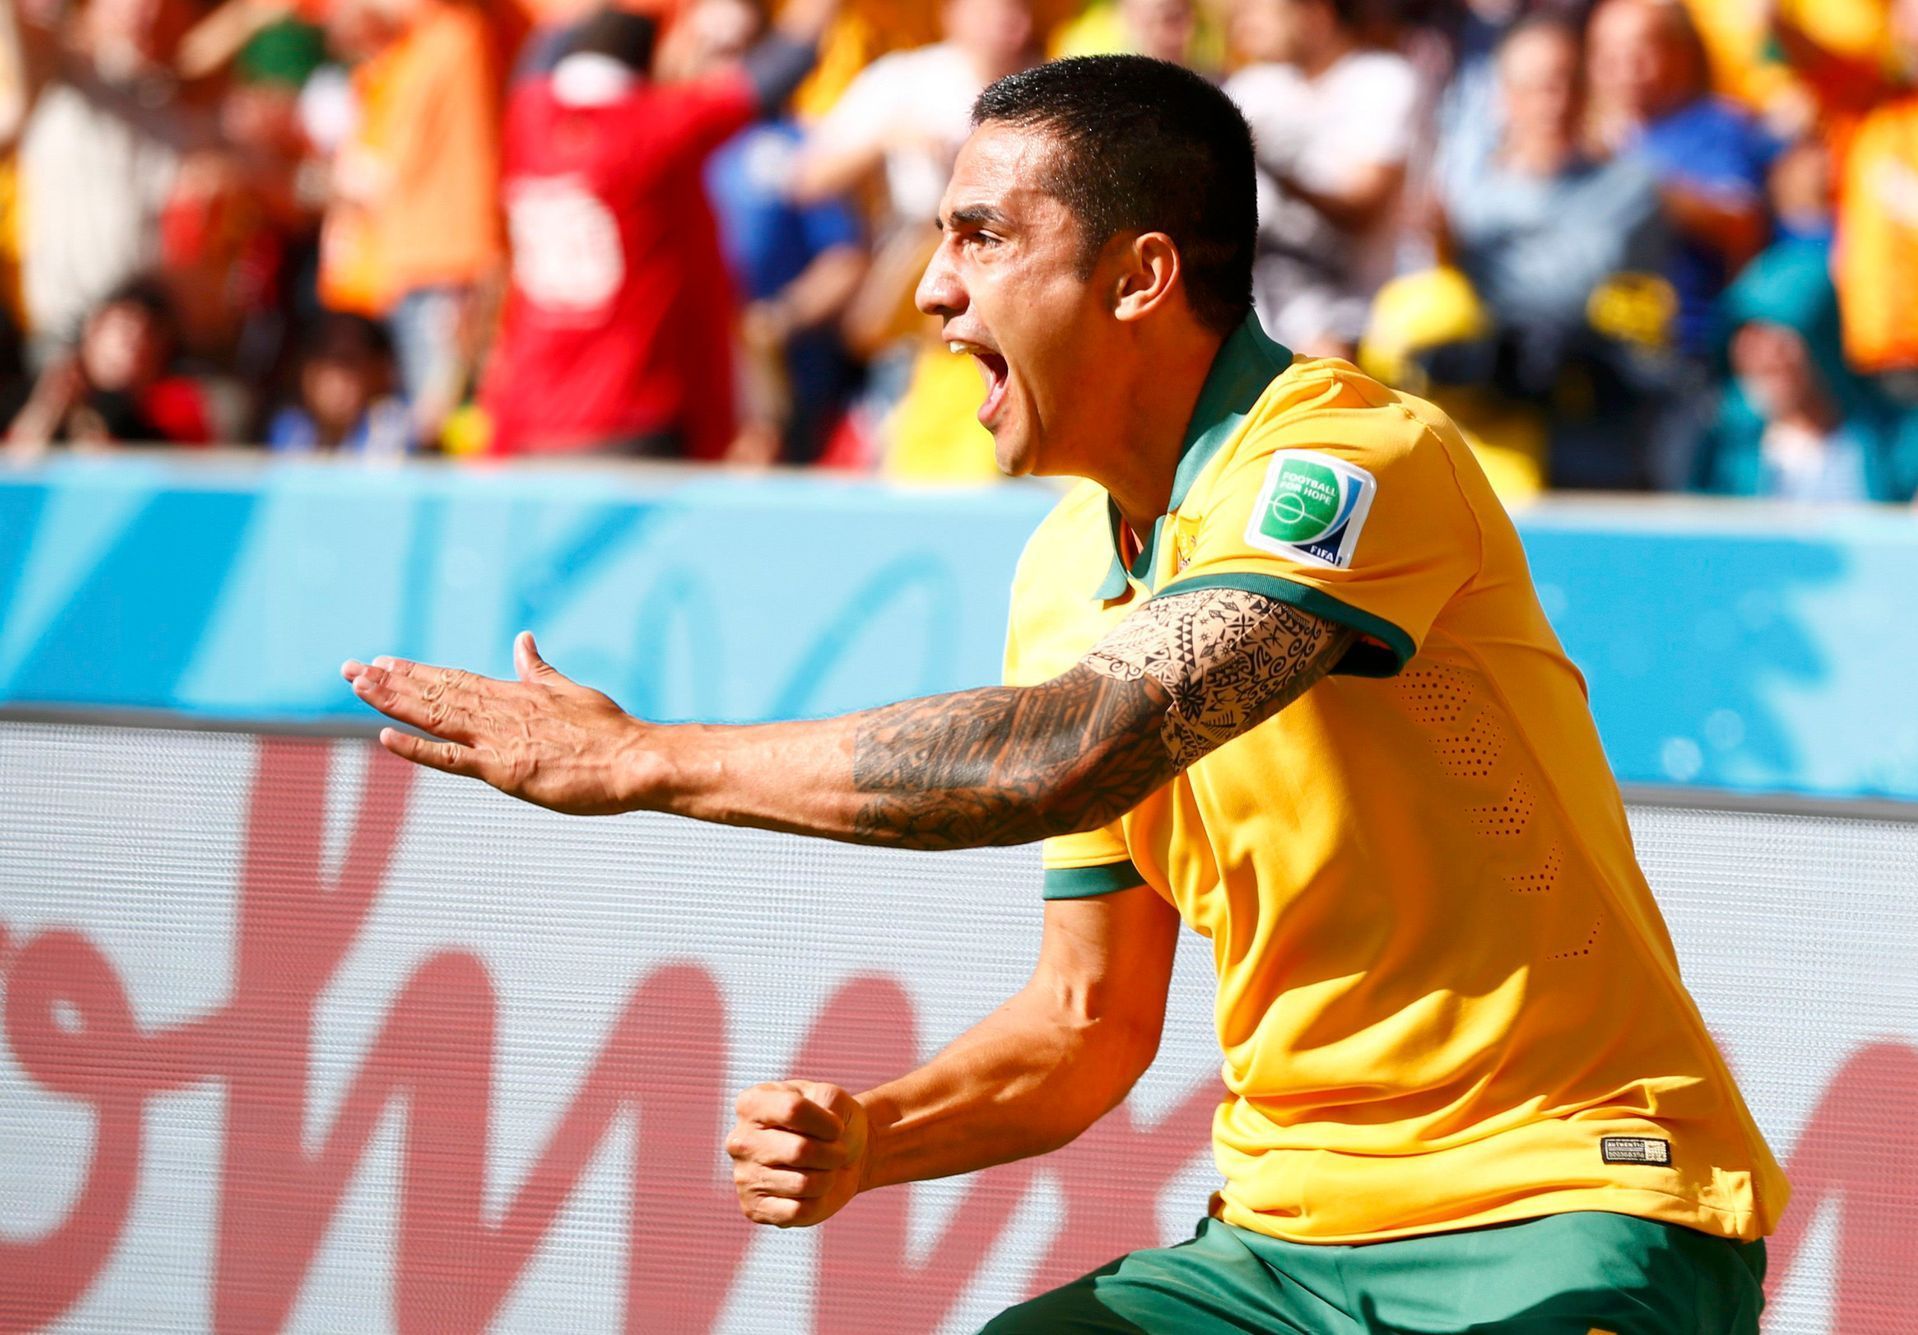 Australia's Tim Cahill celebrates his goal against the Netherlands during their 2014 World Cup Group B soccer match at the Beira Rio stadium in Porto Alegre